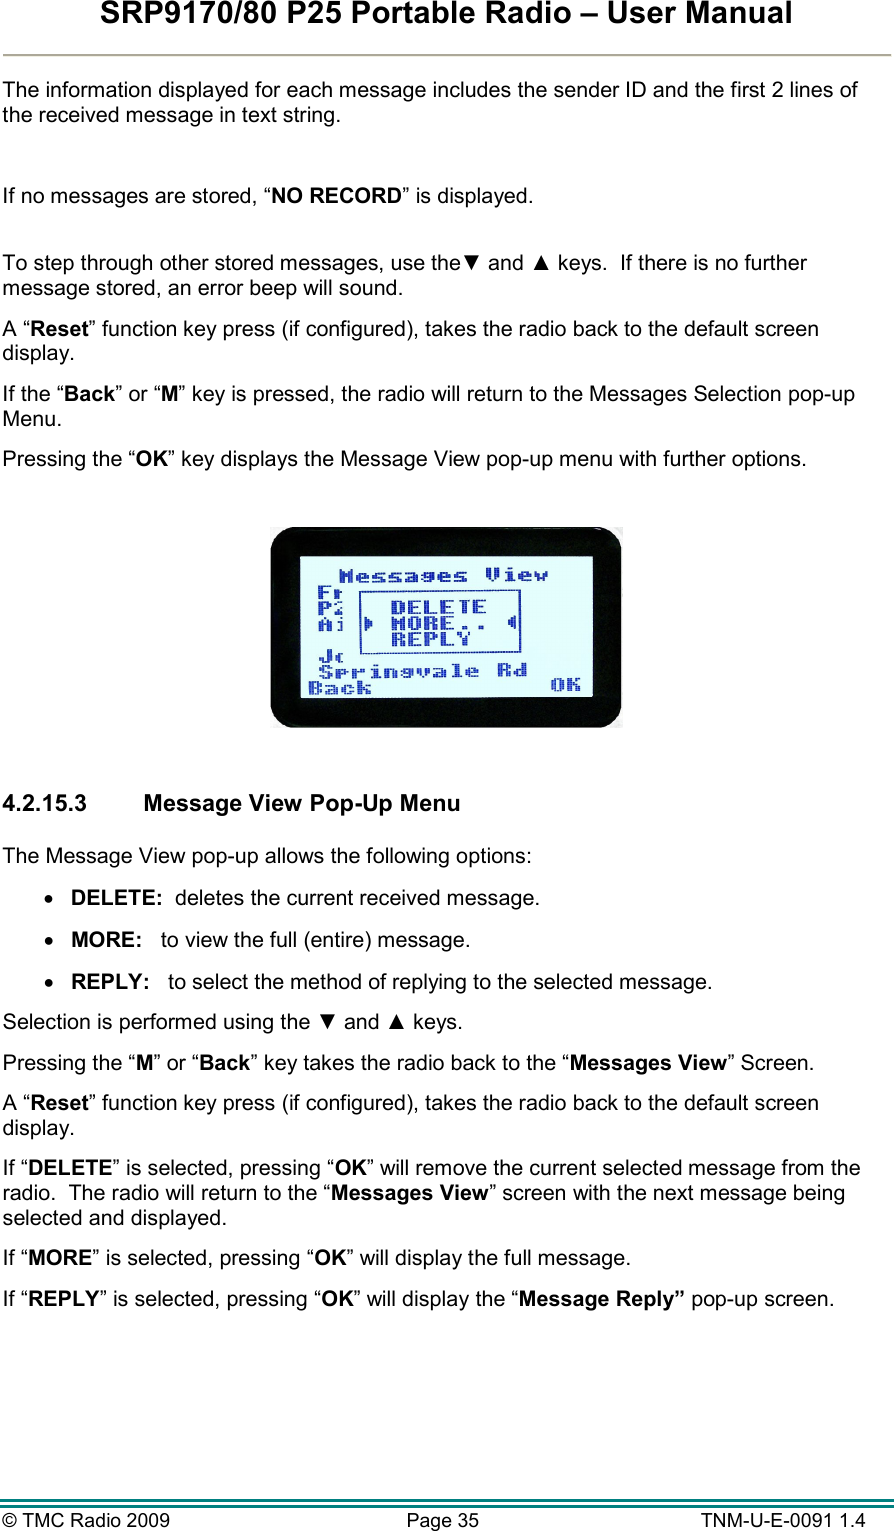 SRP9170/80 P25 Portable Radio – User Manual  © TMC Radio 2009  Page 35   TNM-U-E-0091 1.4 The information displayed for each message includes the sender ID and the first 2 lines of the received message in text string.  If no messages are stored, “NO RECORD” is displayed.  To step through other stored messages, use the▼ and ▲ keys.  If there is no further message stored, an error beep will sound. A “Reset” function key press (if configured), takes the radio back to the default screen display. If the “Back” or “M” key is pressed, the radio will return to the Messages Selection pop-up Menu. Pressing the “OK” key displays the Message View pop-up menu with further options.    4.2.15.3  Message View Pop-Up Menu  The Message View pop-up allows the following options: •  DELETE:  deletes the current received message. •  MORE:   to view the full (entire) message. •  REPLY:   to select the method of replying to the selected message. Selection is performed using the ▼ and ▲ keys. Pressing the “M” or “Back” key takes the radio back to the “Messages View” Screen. A “Reset” function key press (if configured), takes the radio back to the default screen display. If “DELETE” is selected, pressing “OK” will remove the current selected message from the radio.  The radio will return to the “Messages View” screen with the next message being selected and displayed. If “MORE” is selected, pressing “OK” will display the full message. If “REPLY” is selected, pressing “OK” will display the “Message Reply” pop-up screen. 